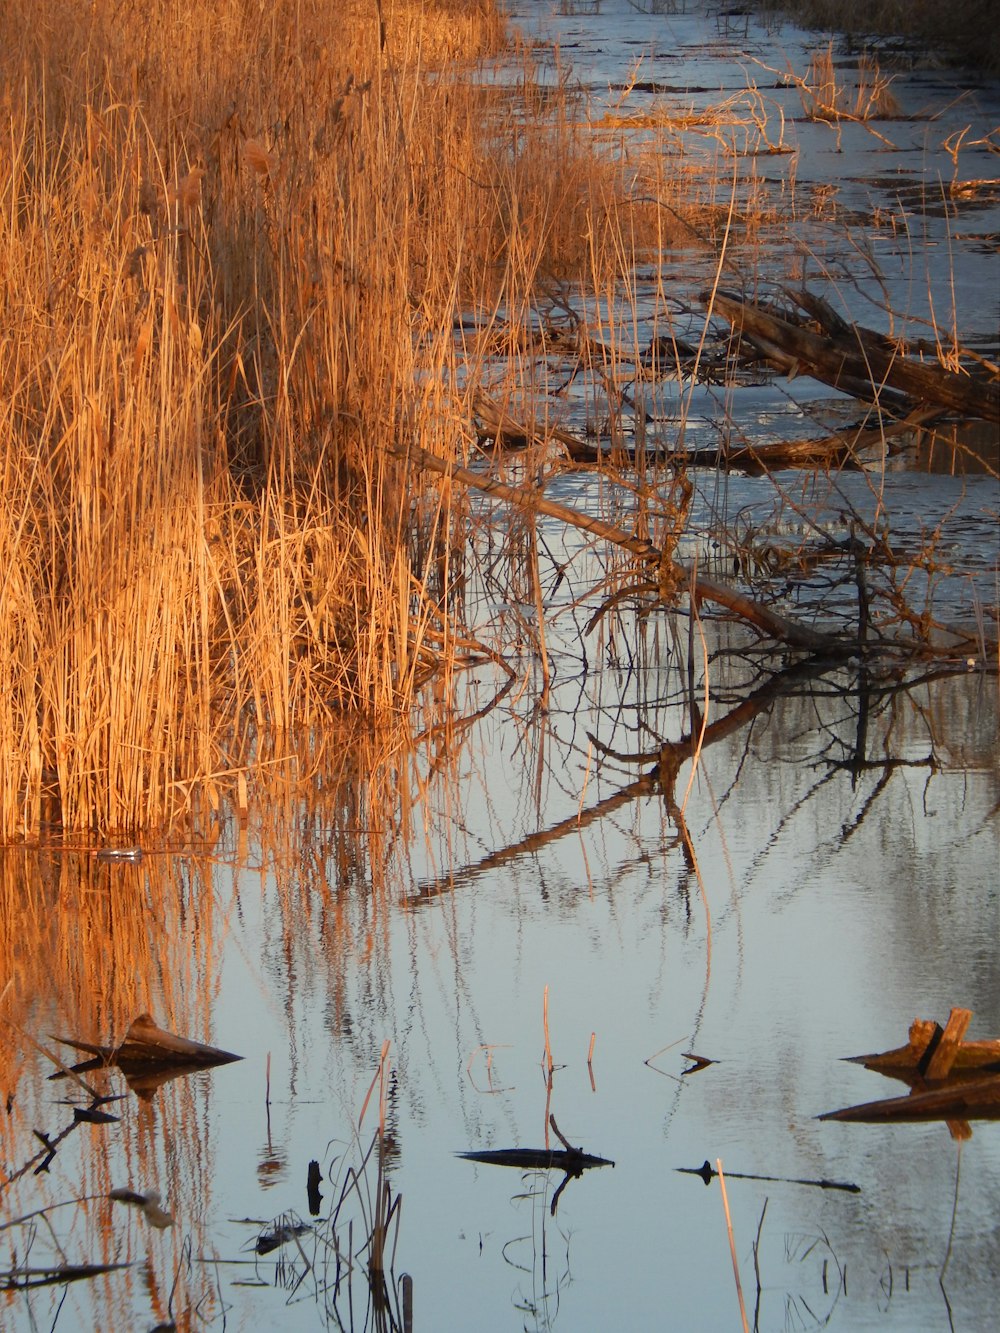 brown plants and twigs on body of water